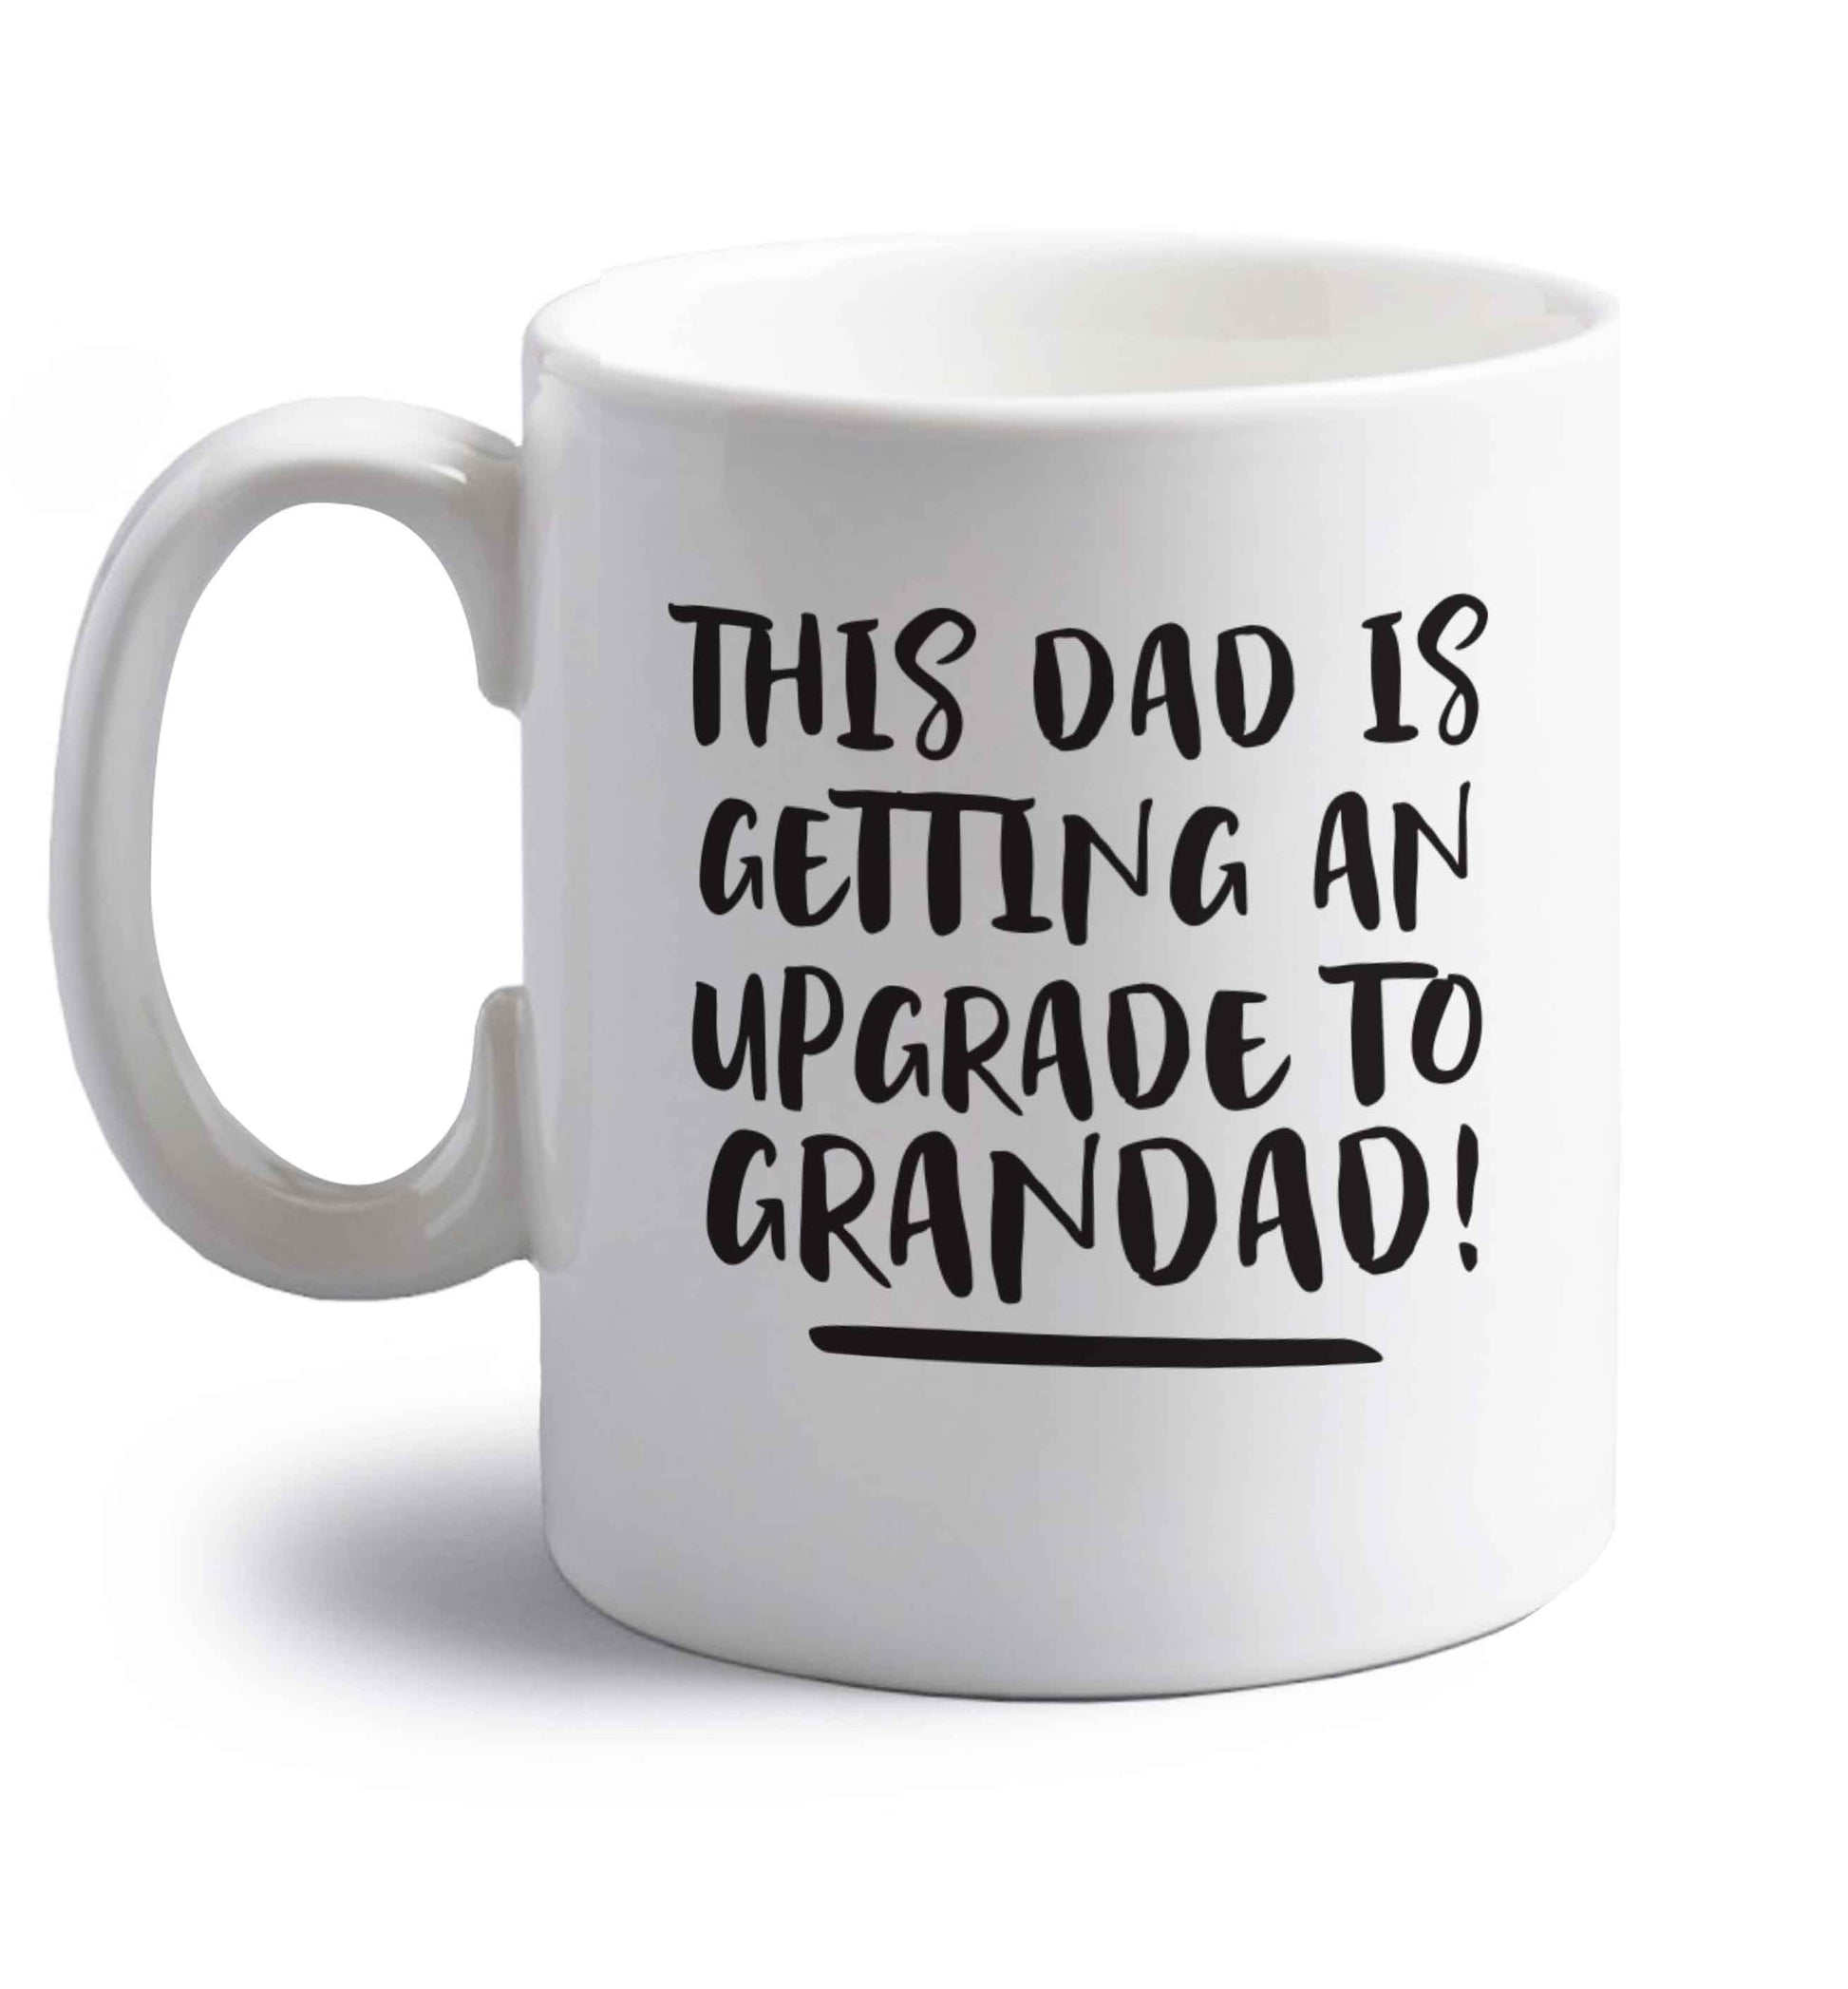 This dad is getting an upgrade to grandad! right handed white ceramic mug 